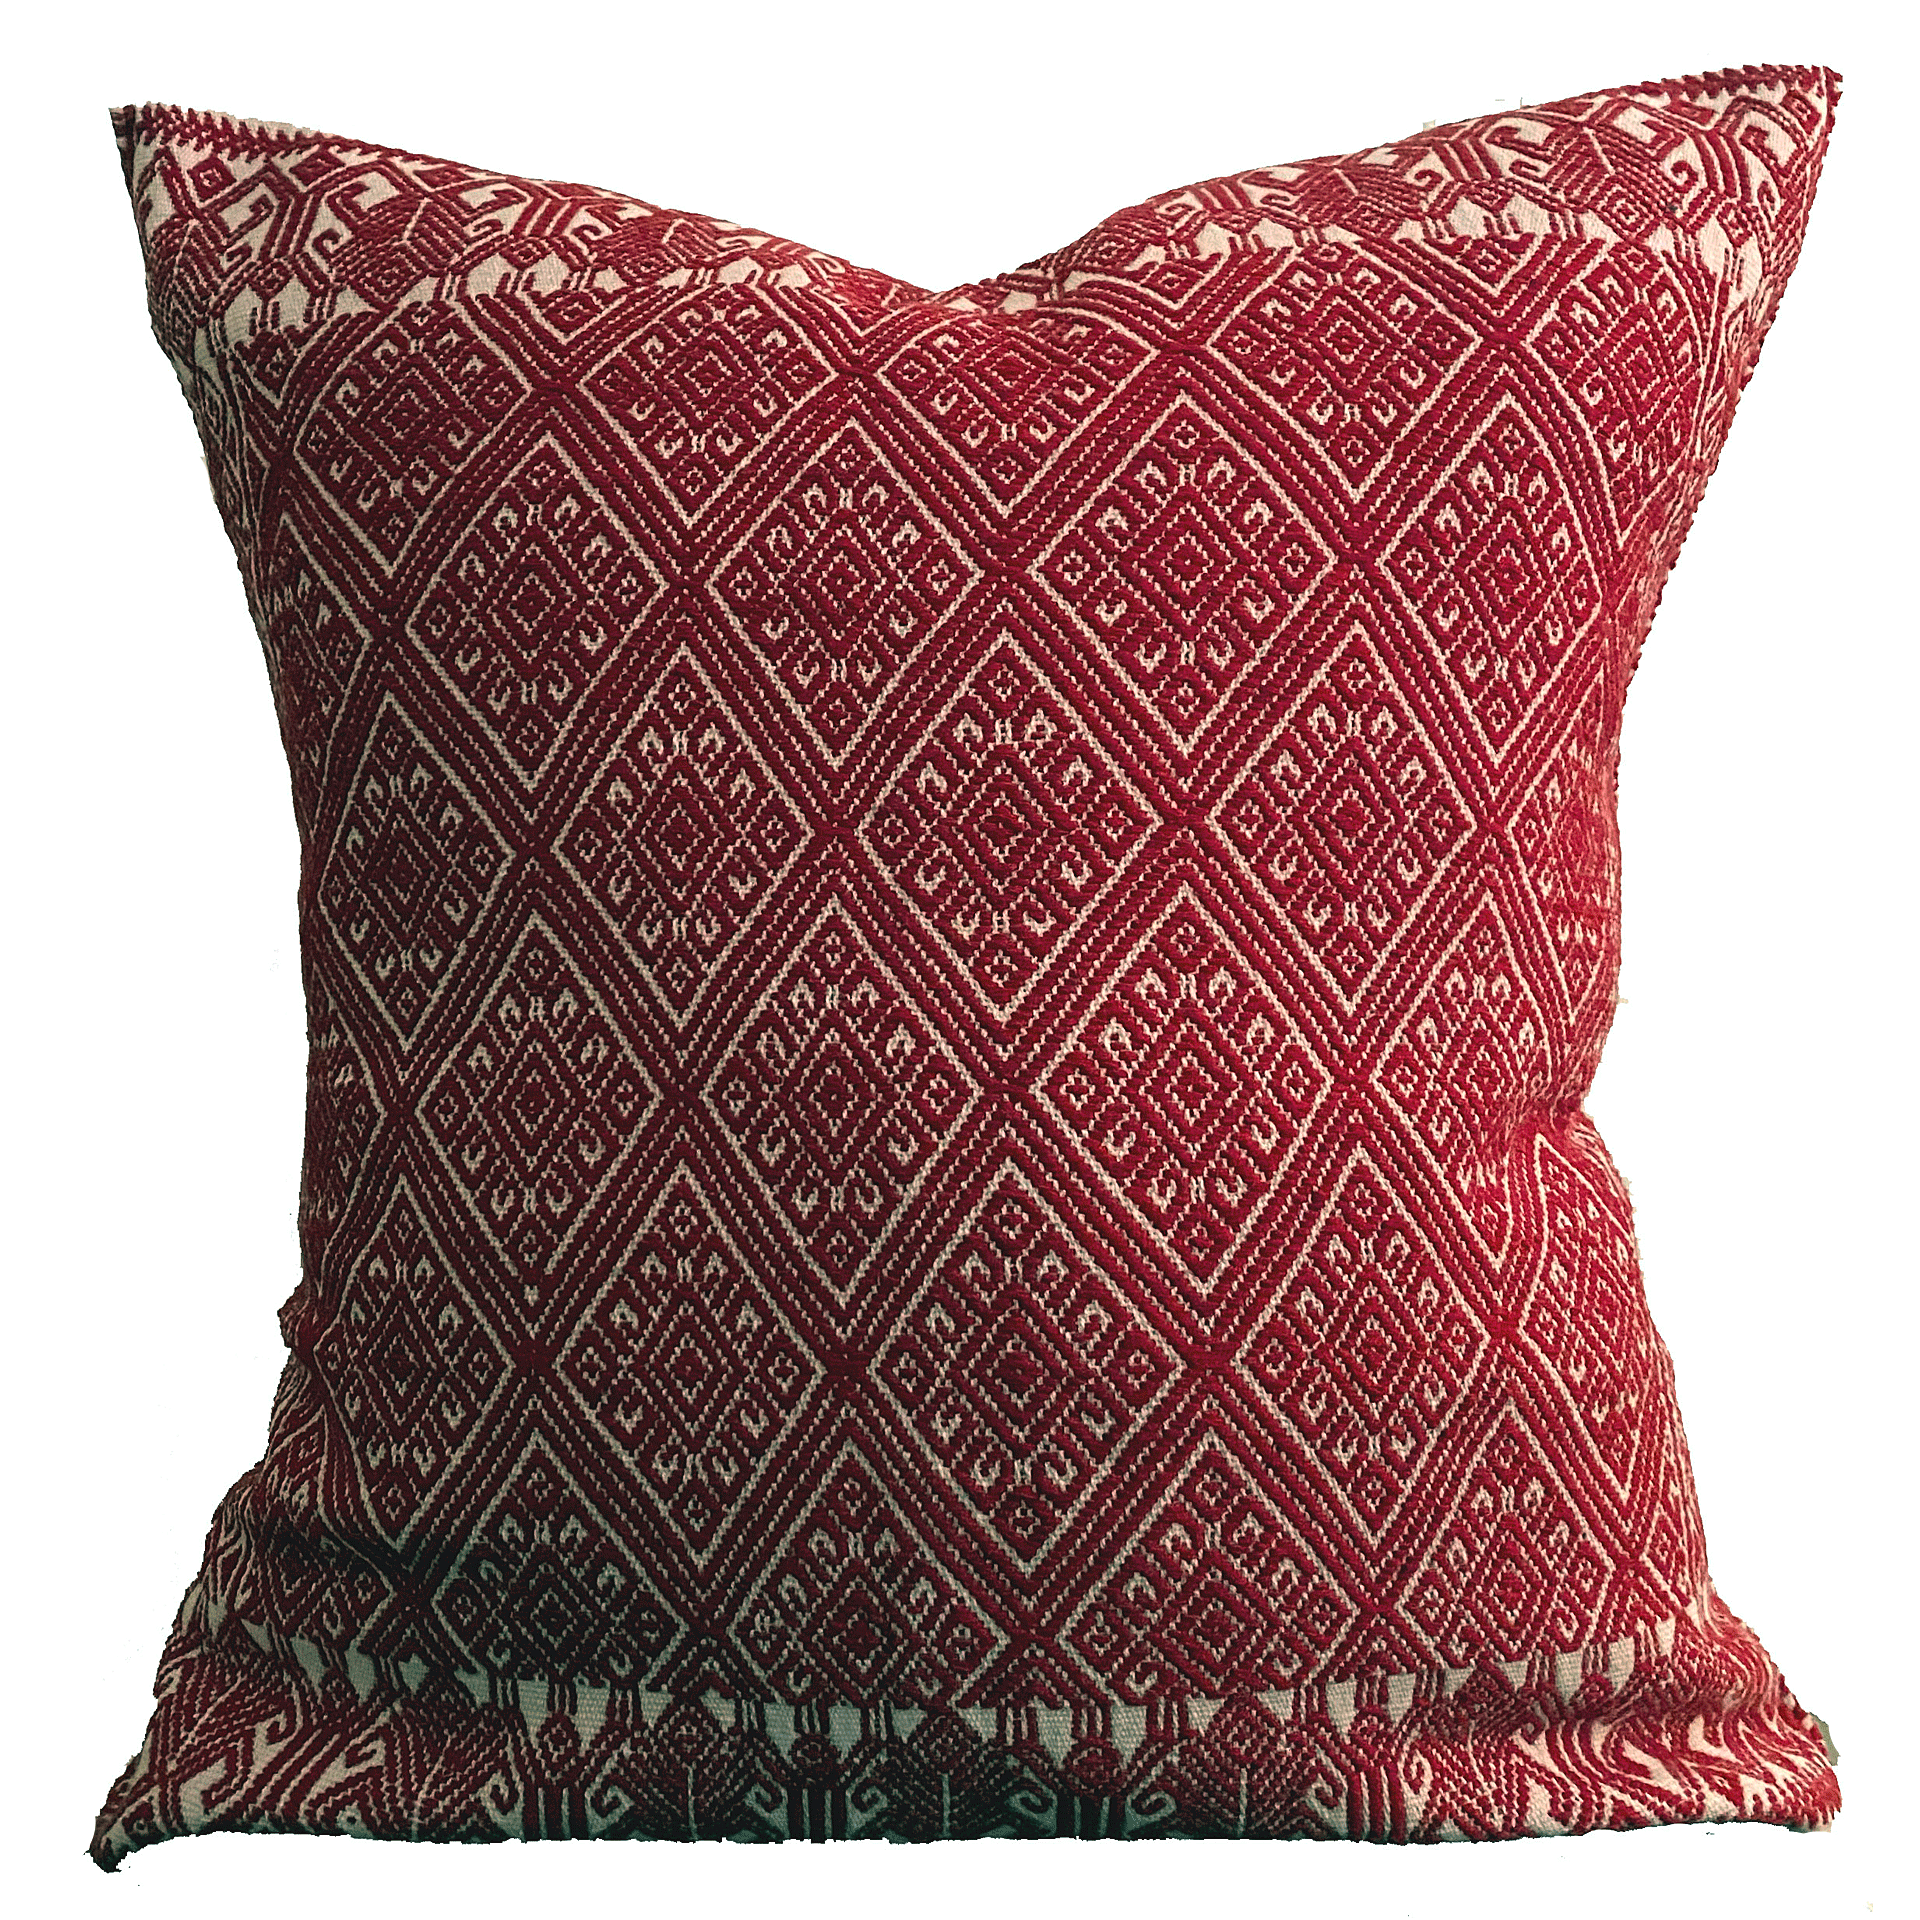 Chiapas Maya Embroidery - Red Pillow Set of 2